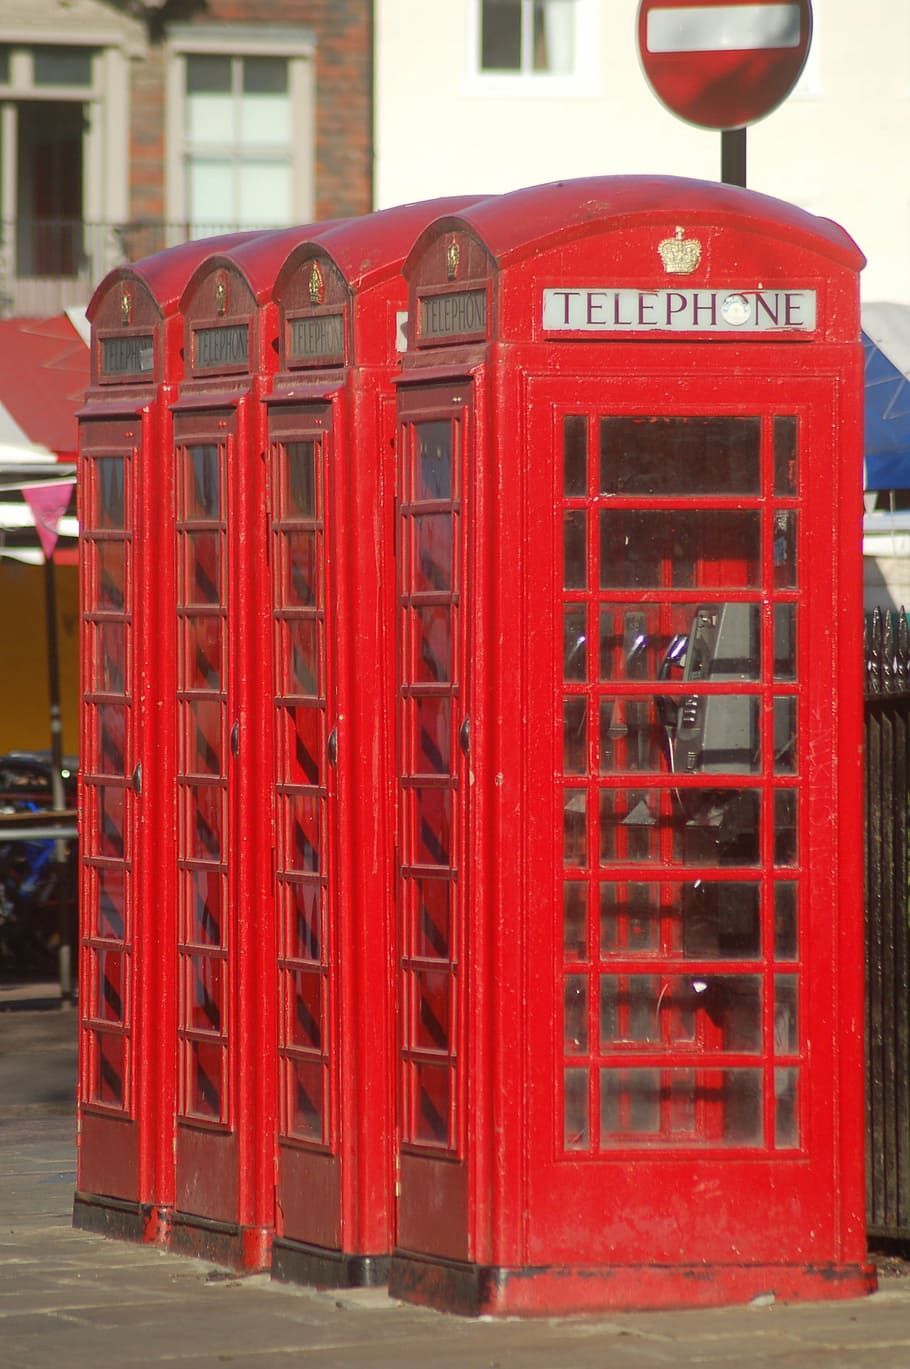 public phone, red, great britain, telephone booth, telephone, communication, text, day, built structure, building exterior